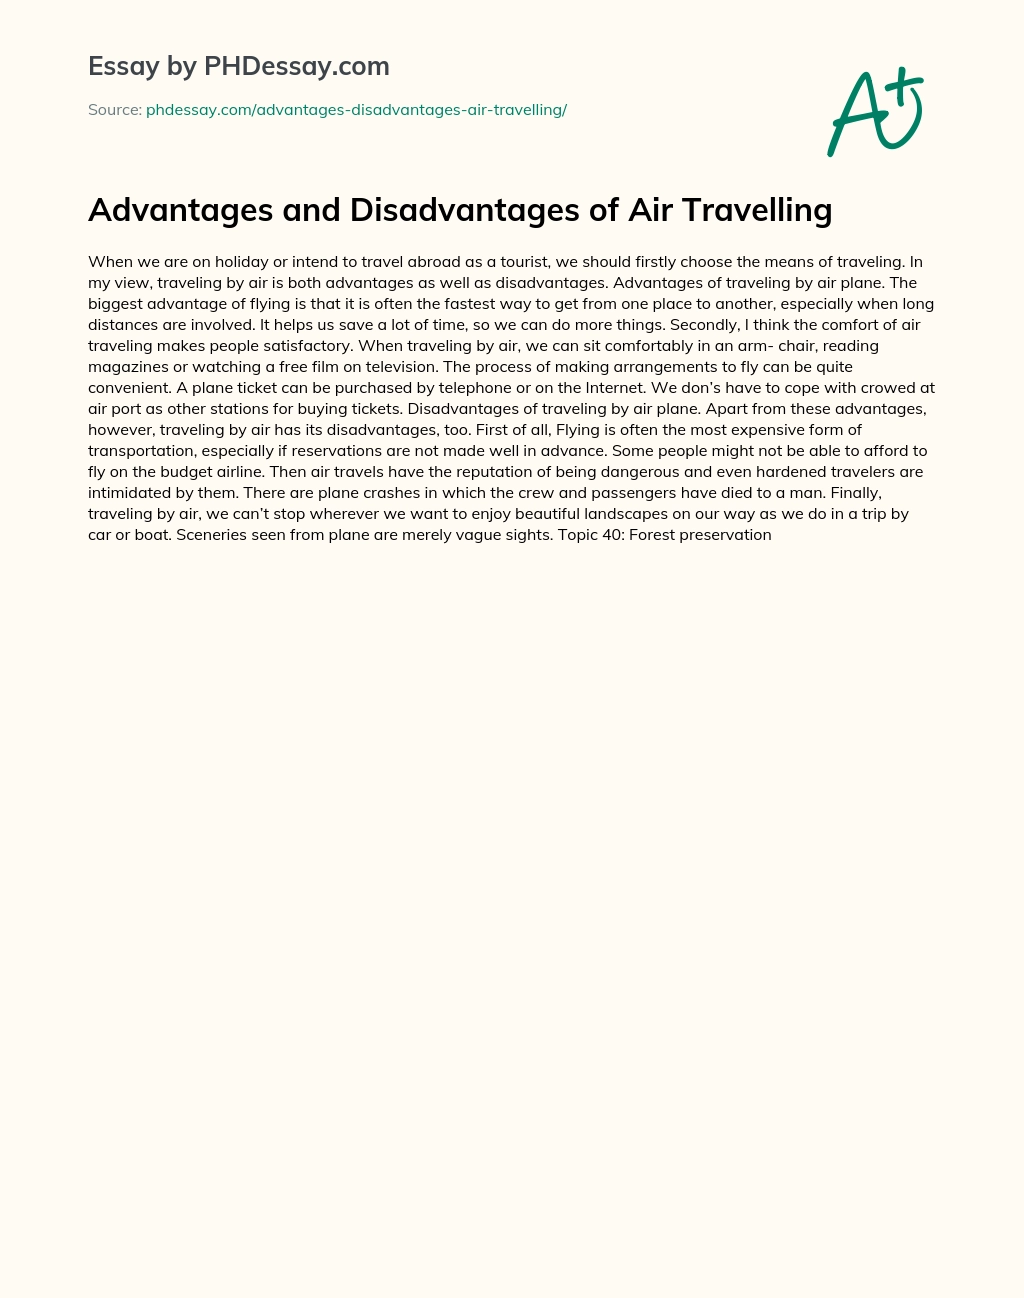 Advantages and Disadvantages of Air Travelling essay